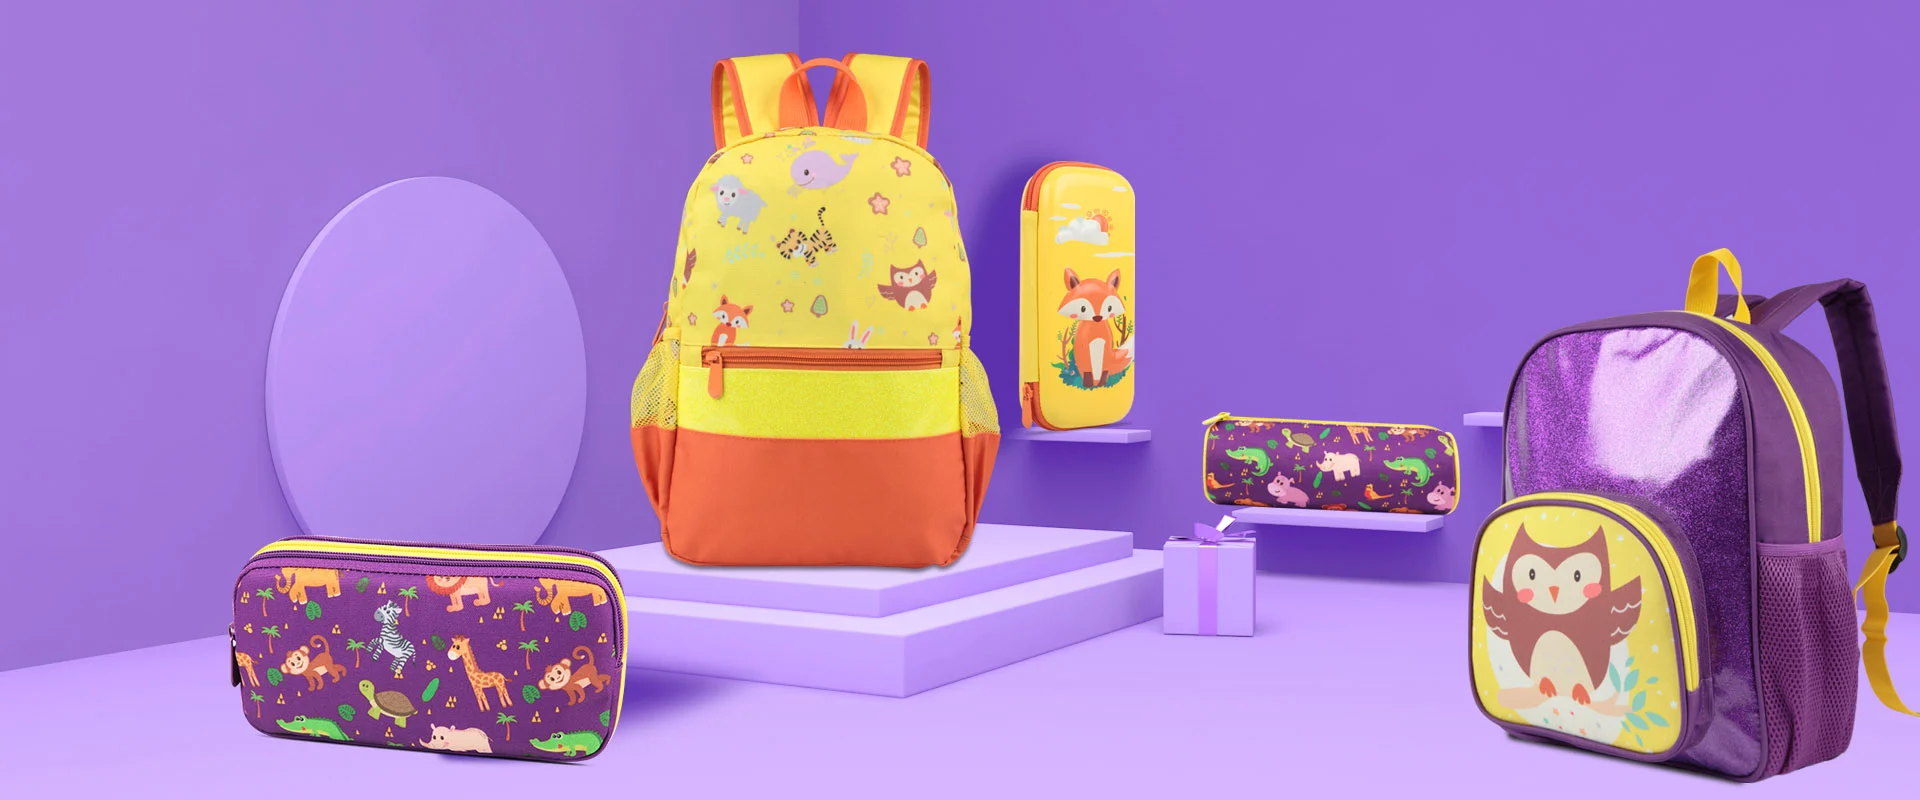 Kids Forest Friends Student Backpack Collection